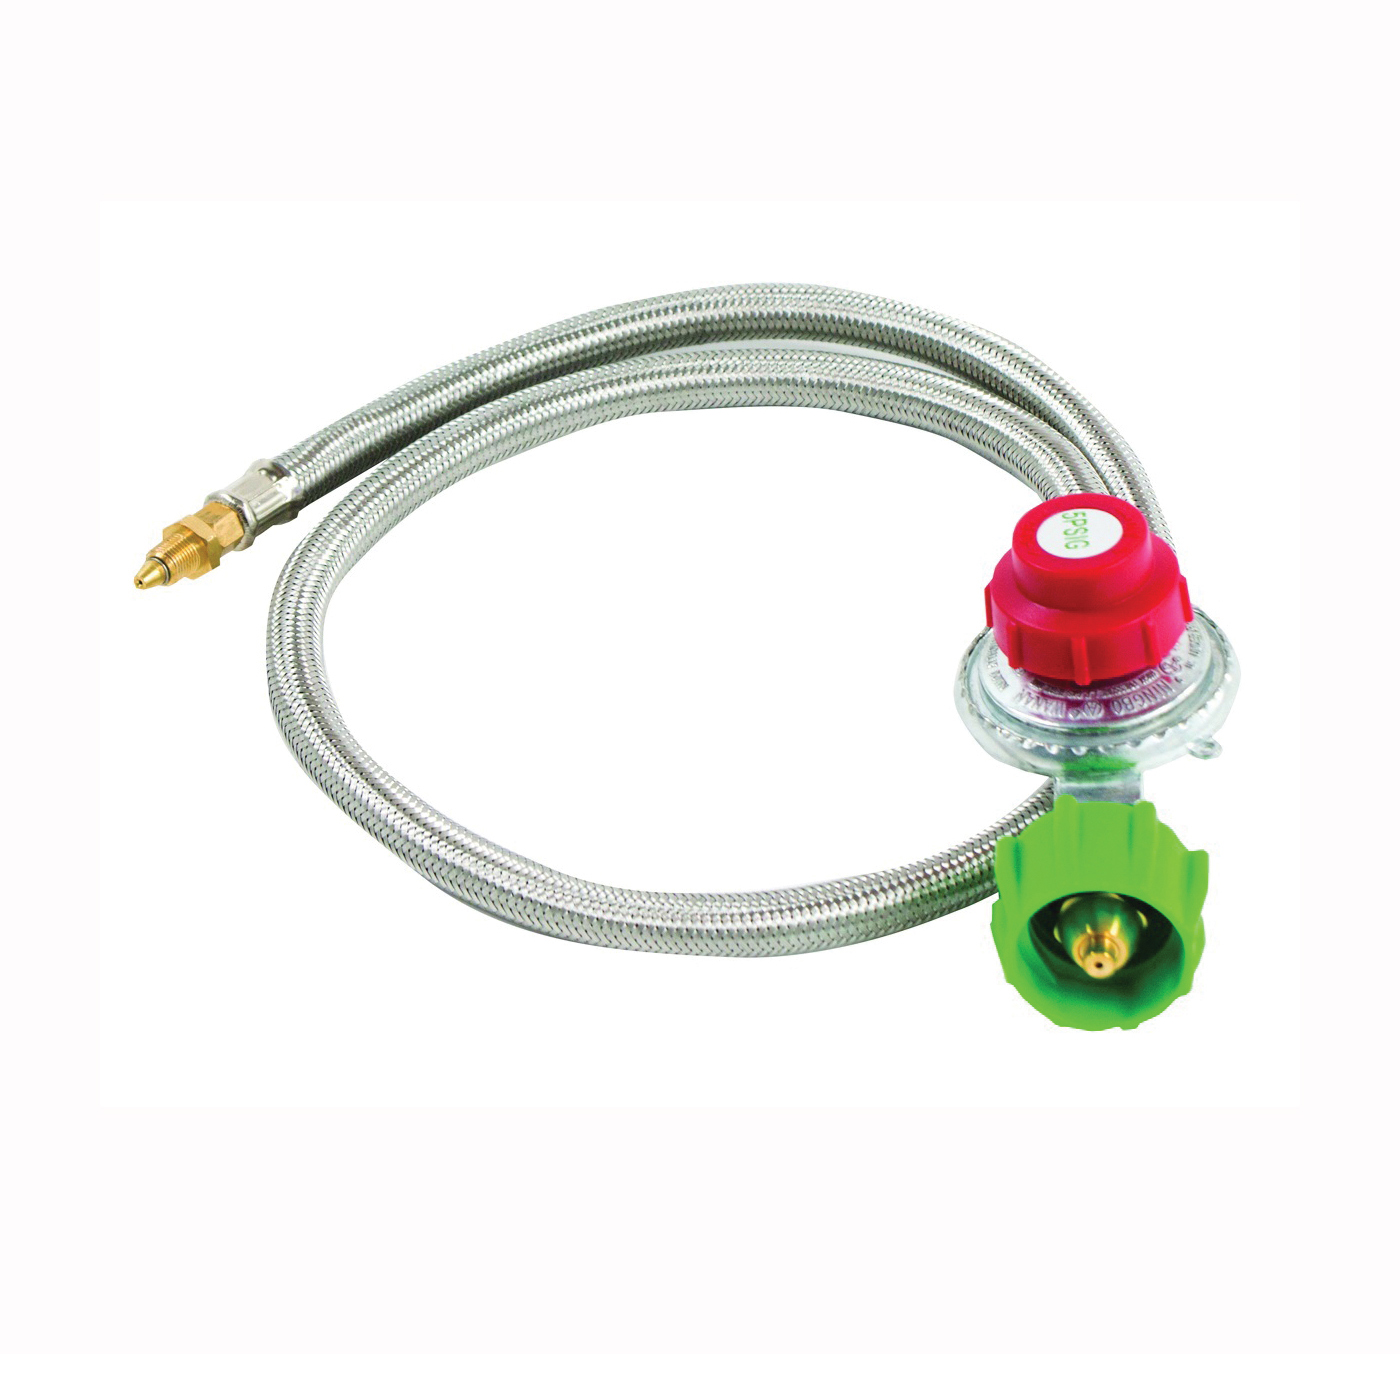 M5HPR Hose and Regulator, 1/8 in Connection, 36 in L Hose, Stainless Steel